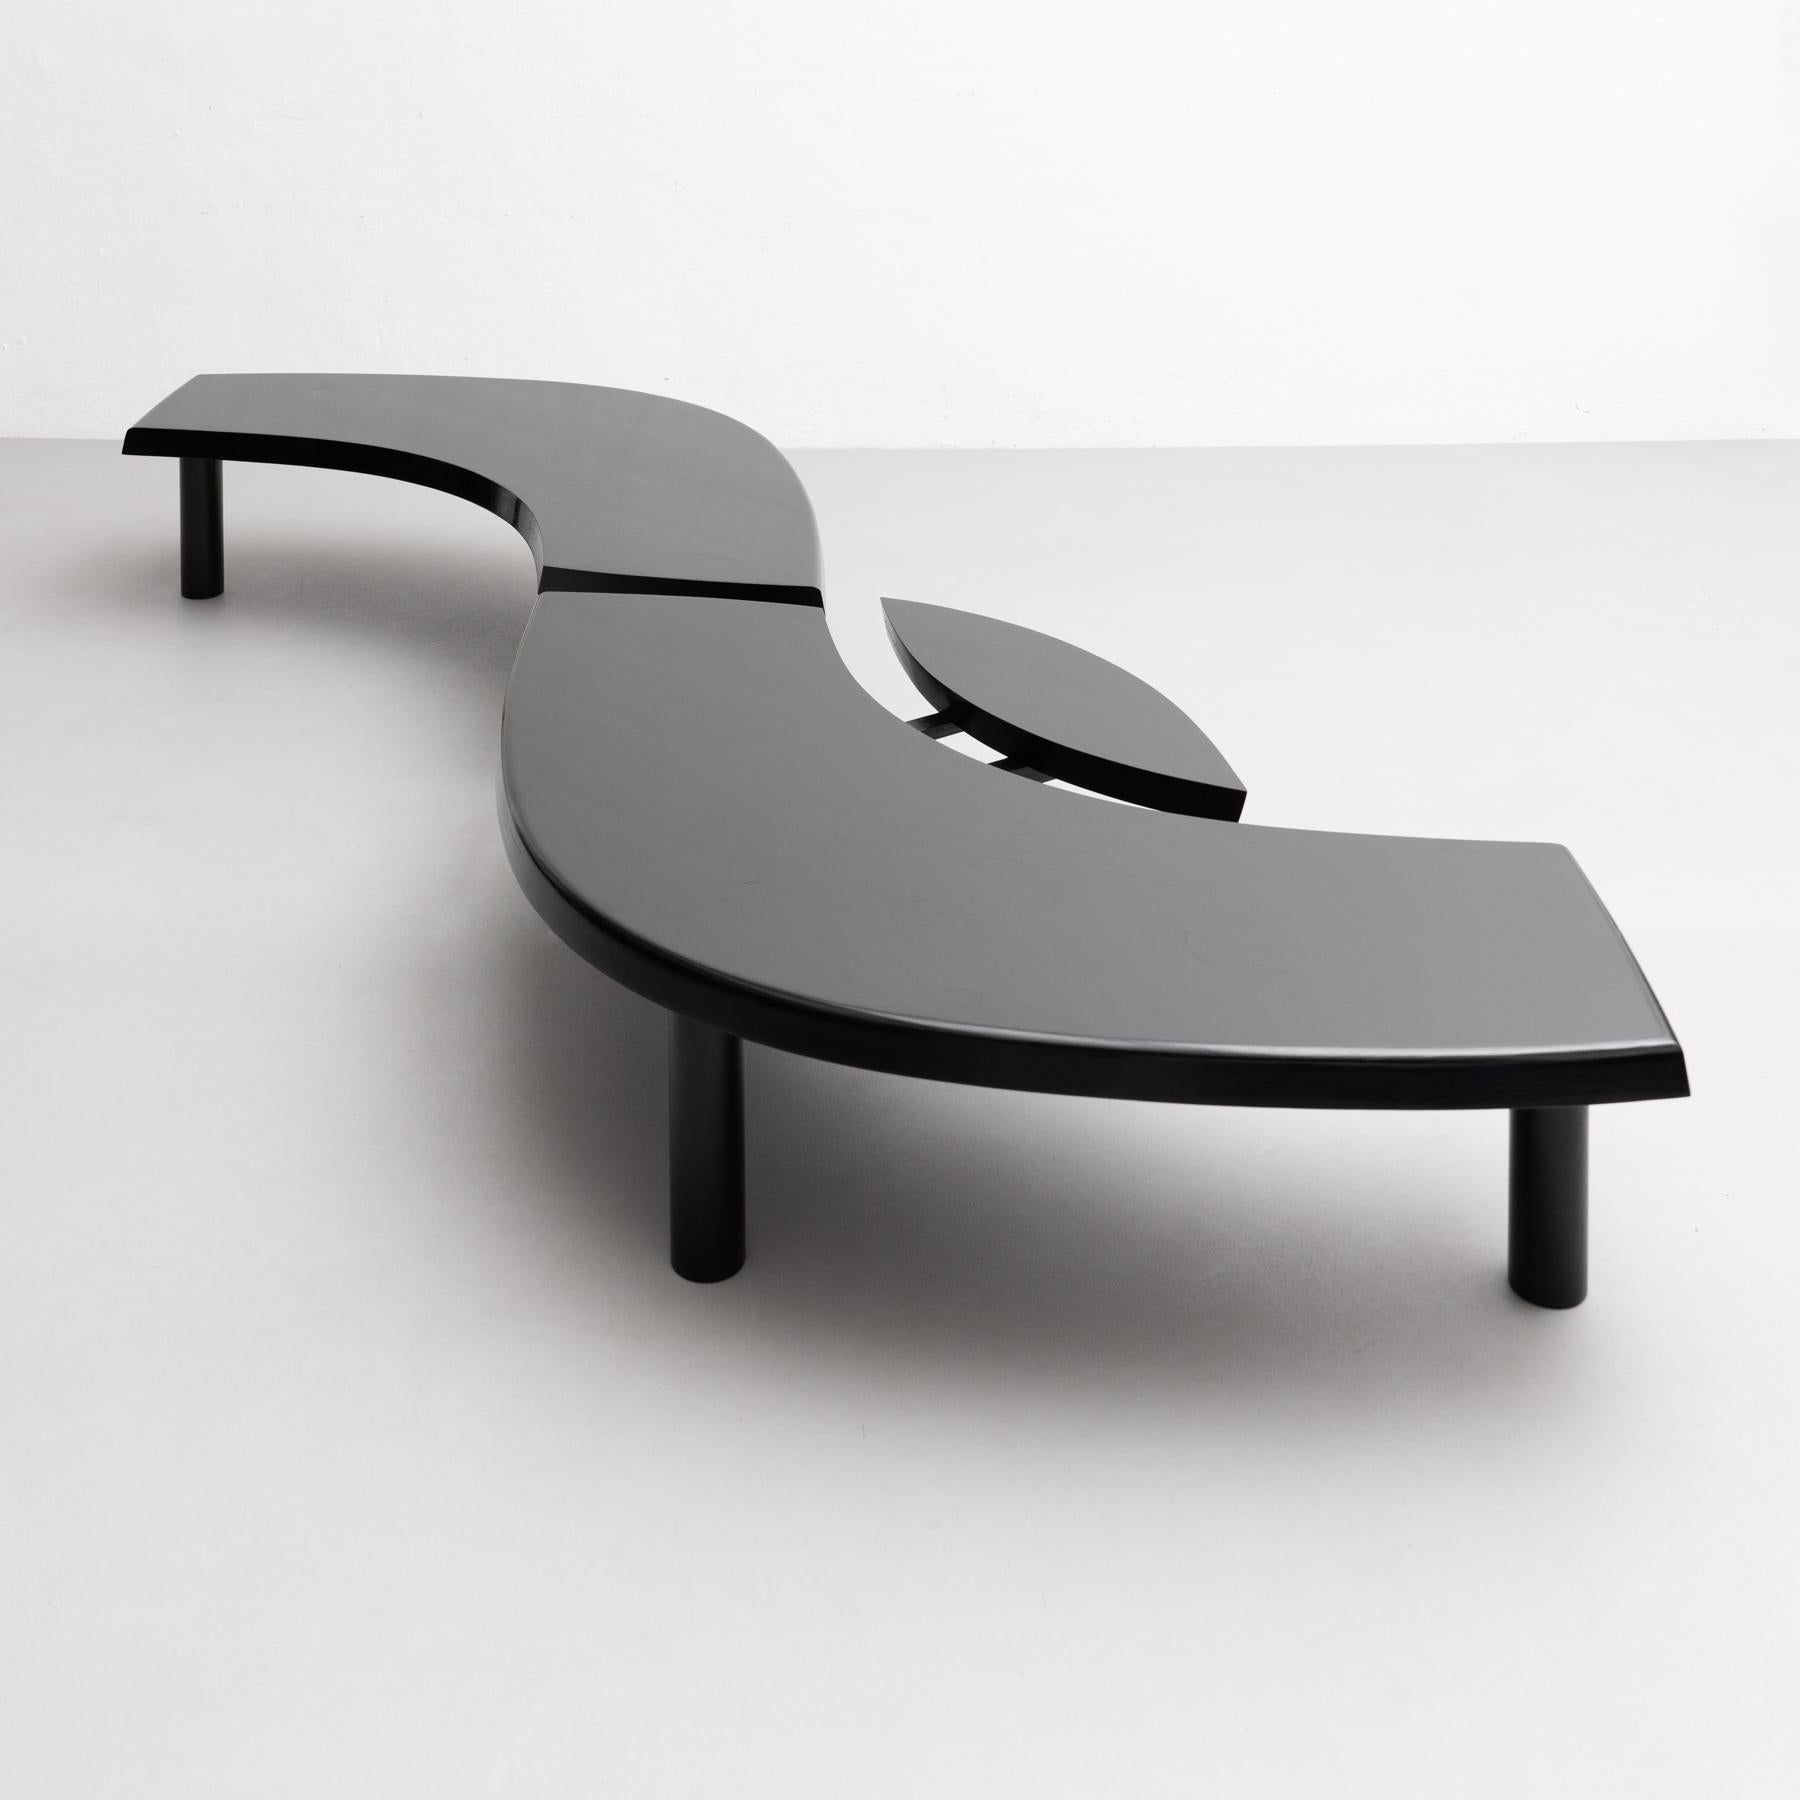 Wood Sleek Sophistication: Pierre Chapo's T22 Table in Special Black Edition For Sale